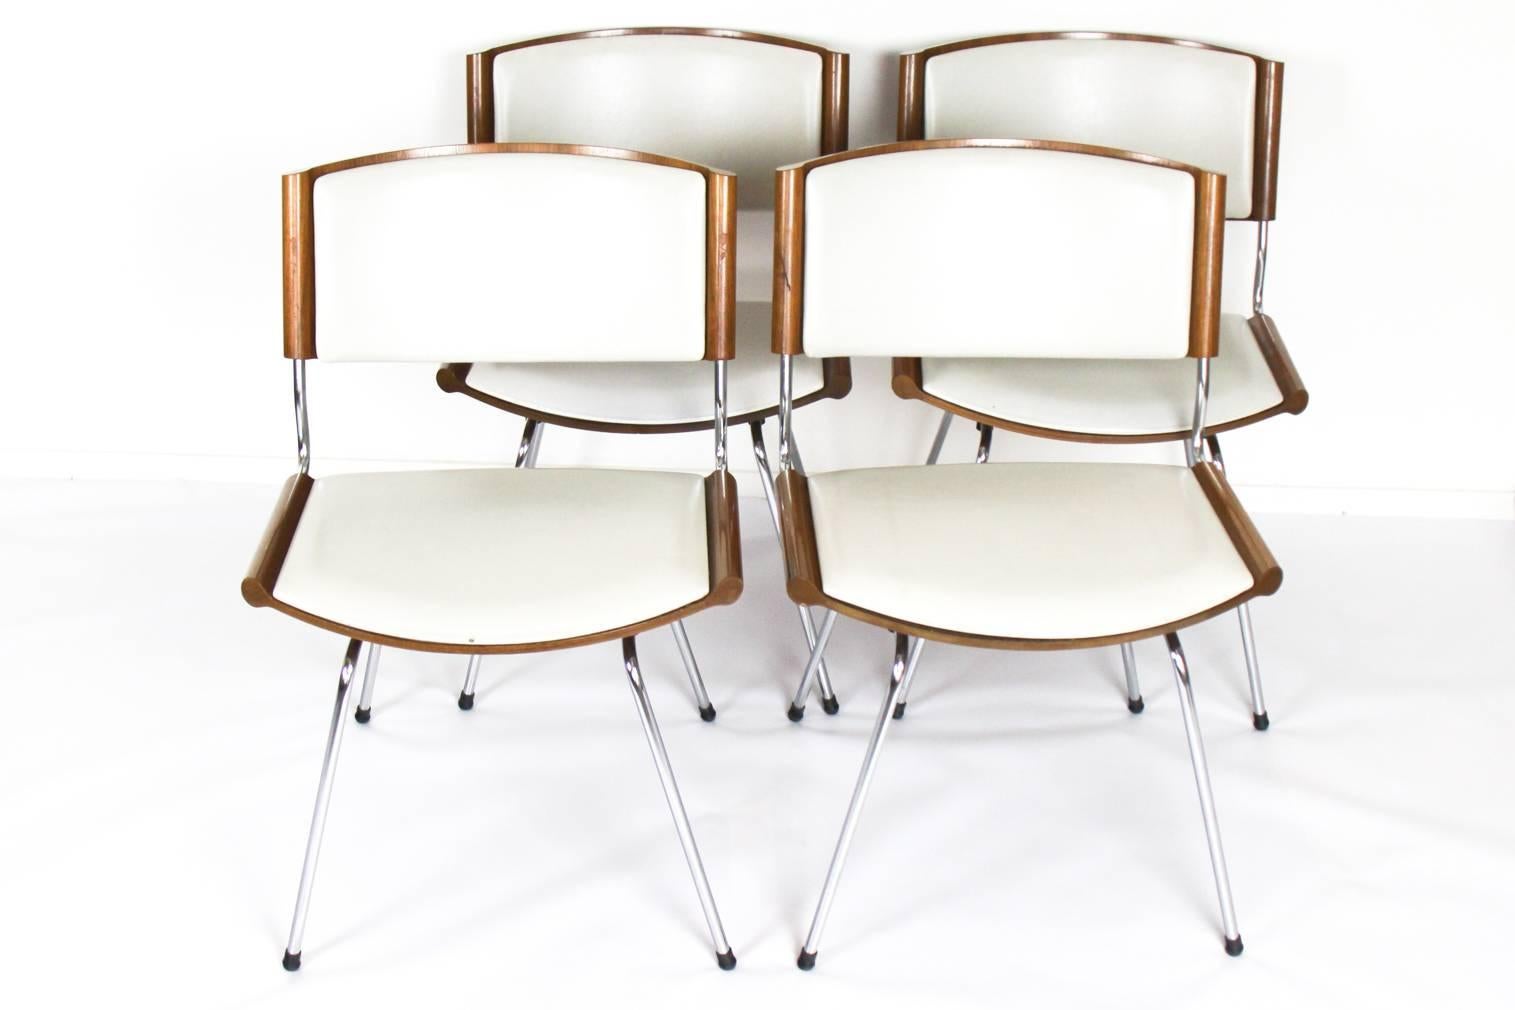 Set of four dining chairs, in metal, wood and faux-leather by Nanna & Jørgen Ditzel for Kolds Savvaerk, Denmark, 1958. Model 150, also called 'Badminton' chair due to the end of the backrest and seats which has been inspired by the of the